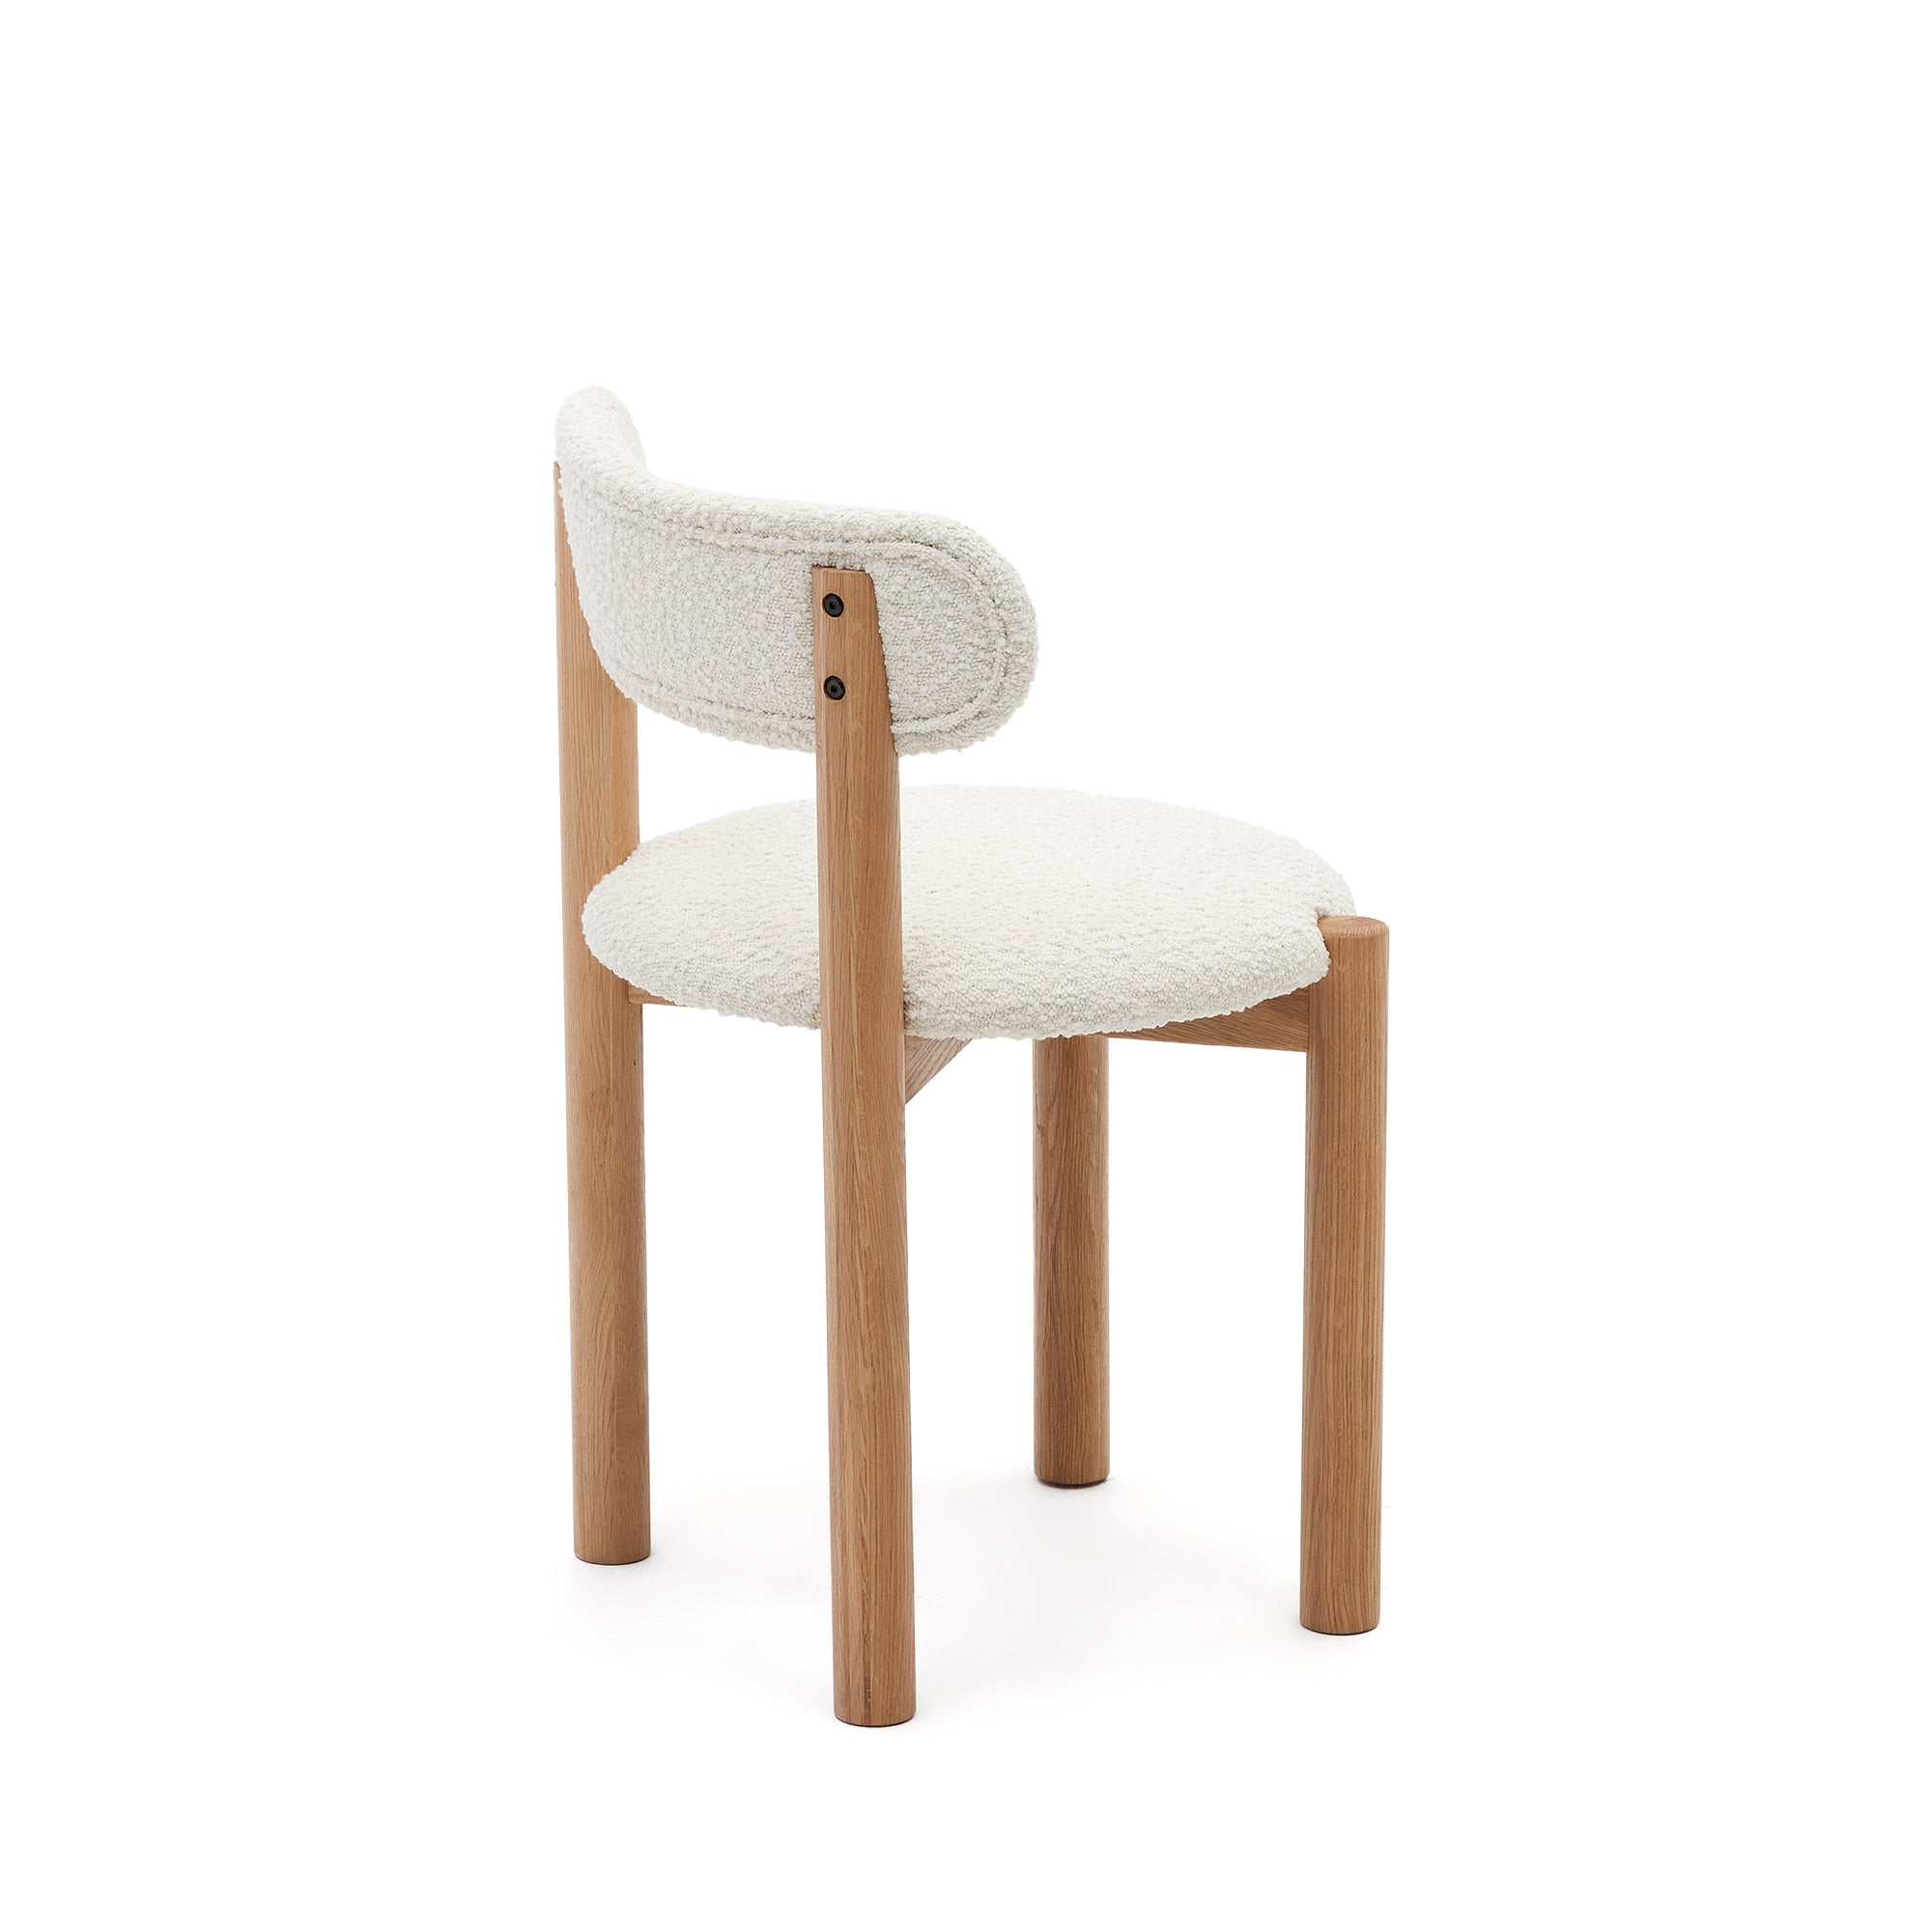 Nebai chair in white fleece and solid oak wood structure with natural finish